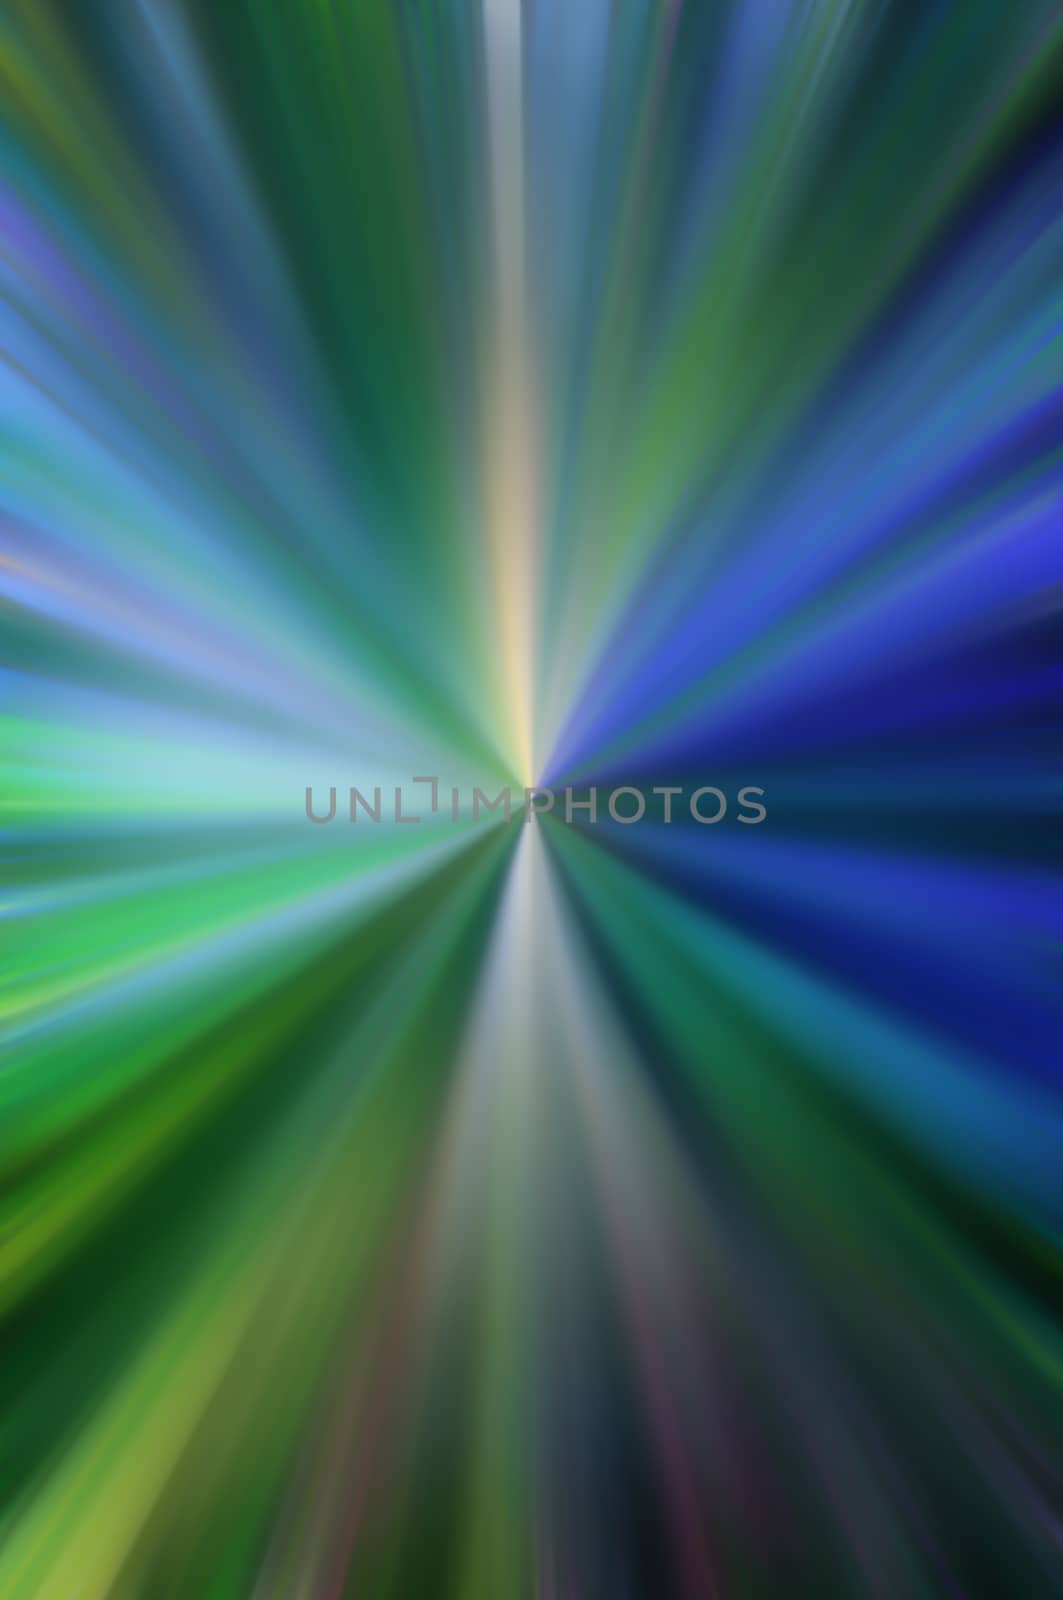 Abstract soft and blurred of speed action background concept